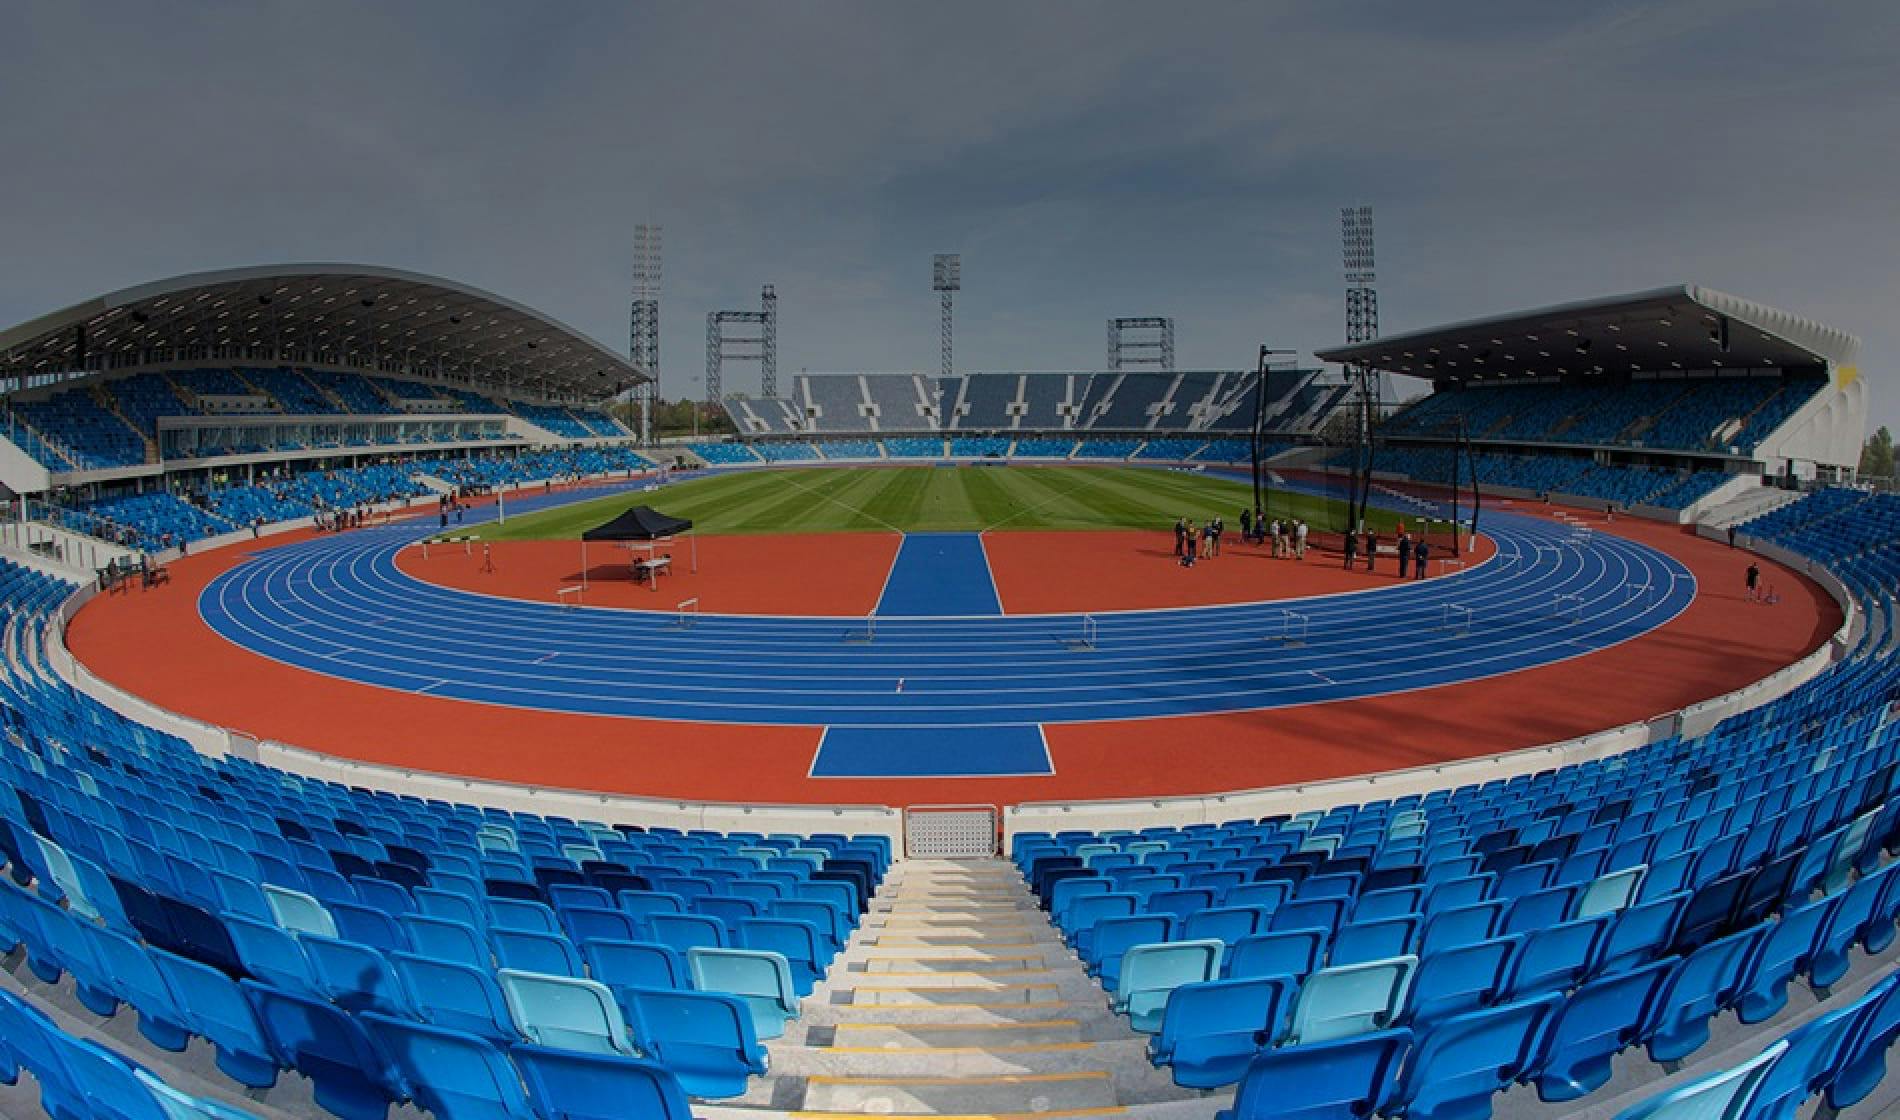 Picture of an stadium that was used in the Birmingham Commonwealth games